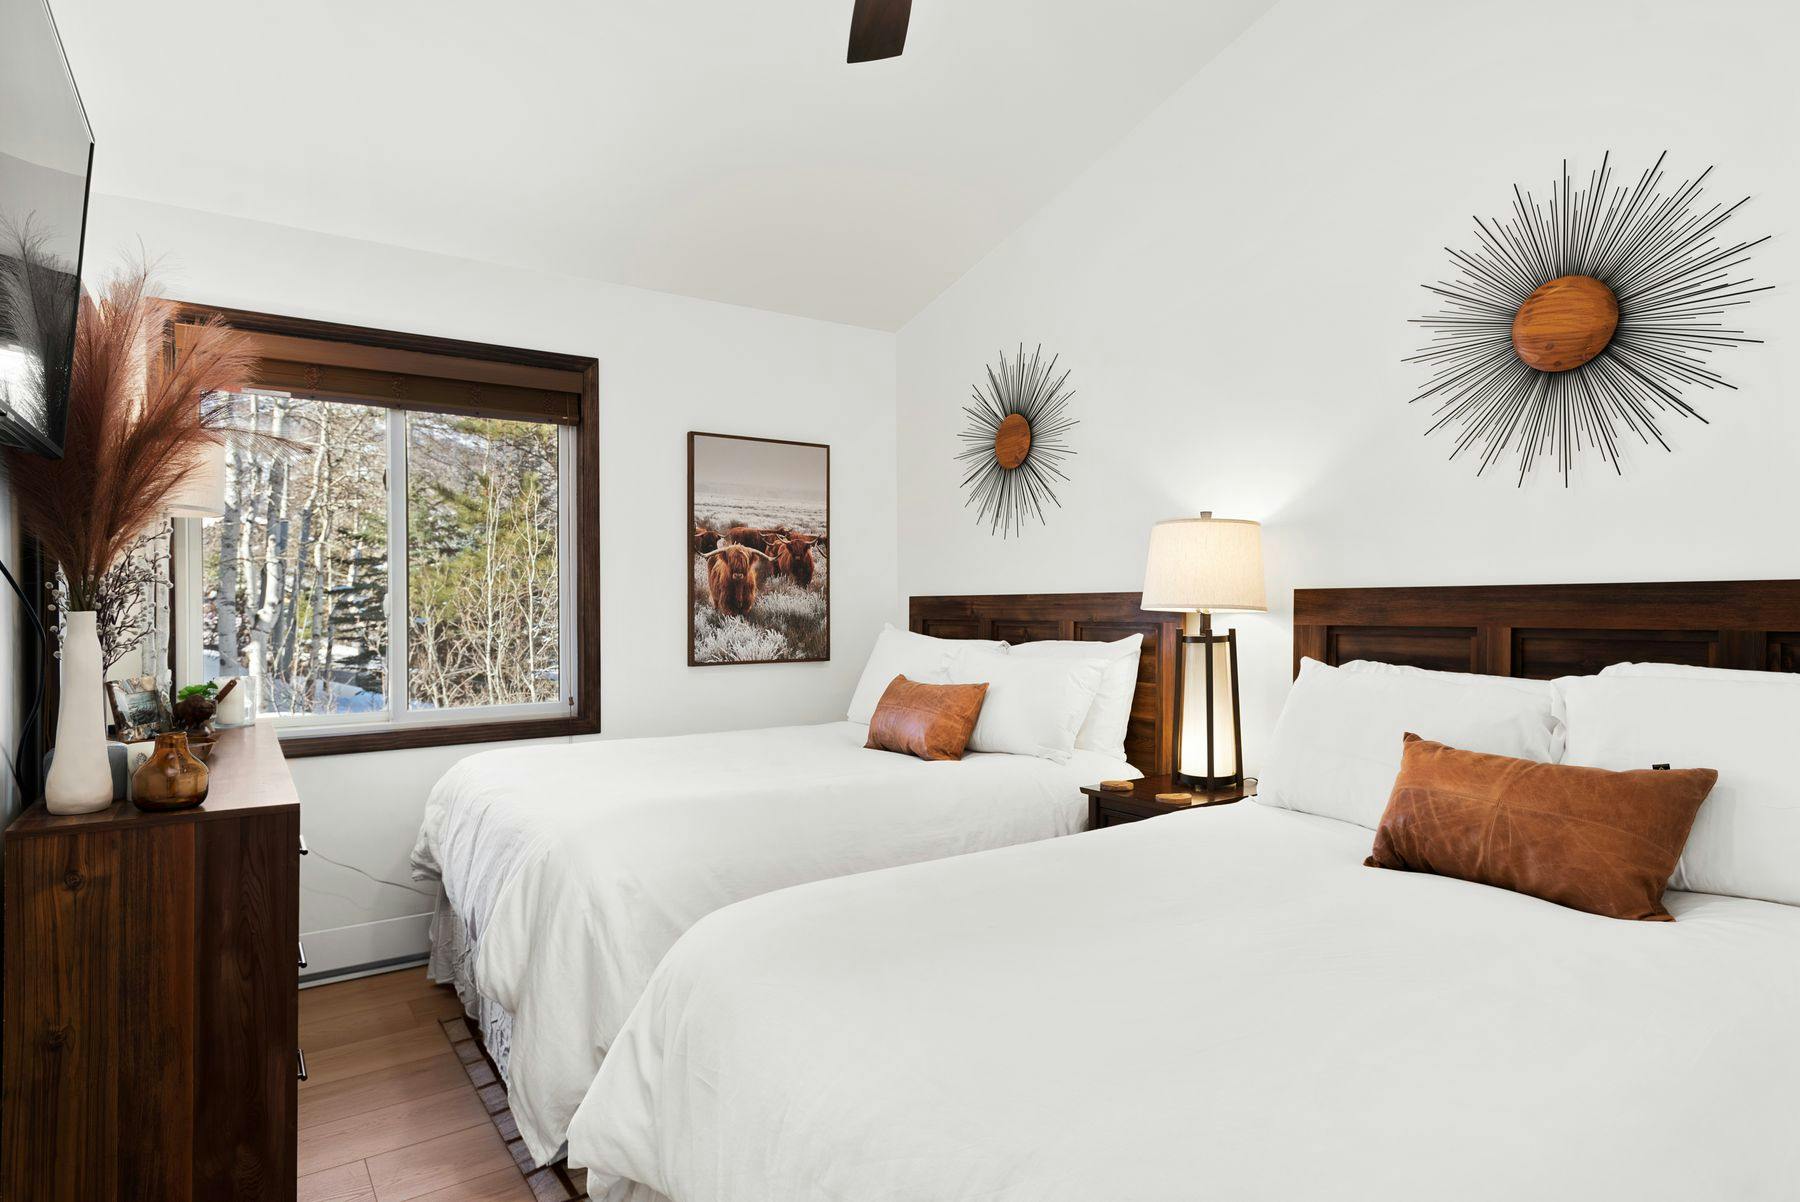 Beautifully decorated bedroom at a Snowmass Vacations rental home